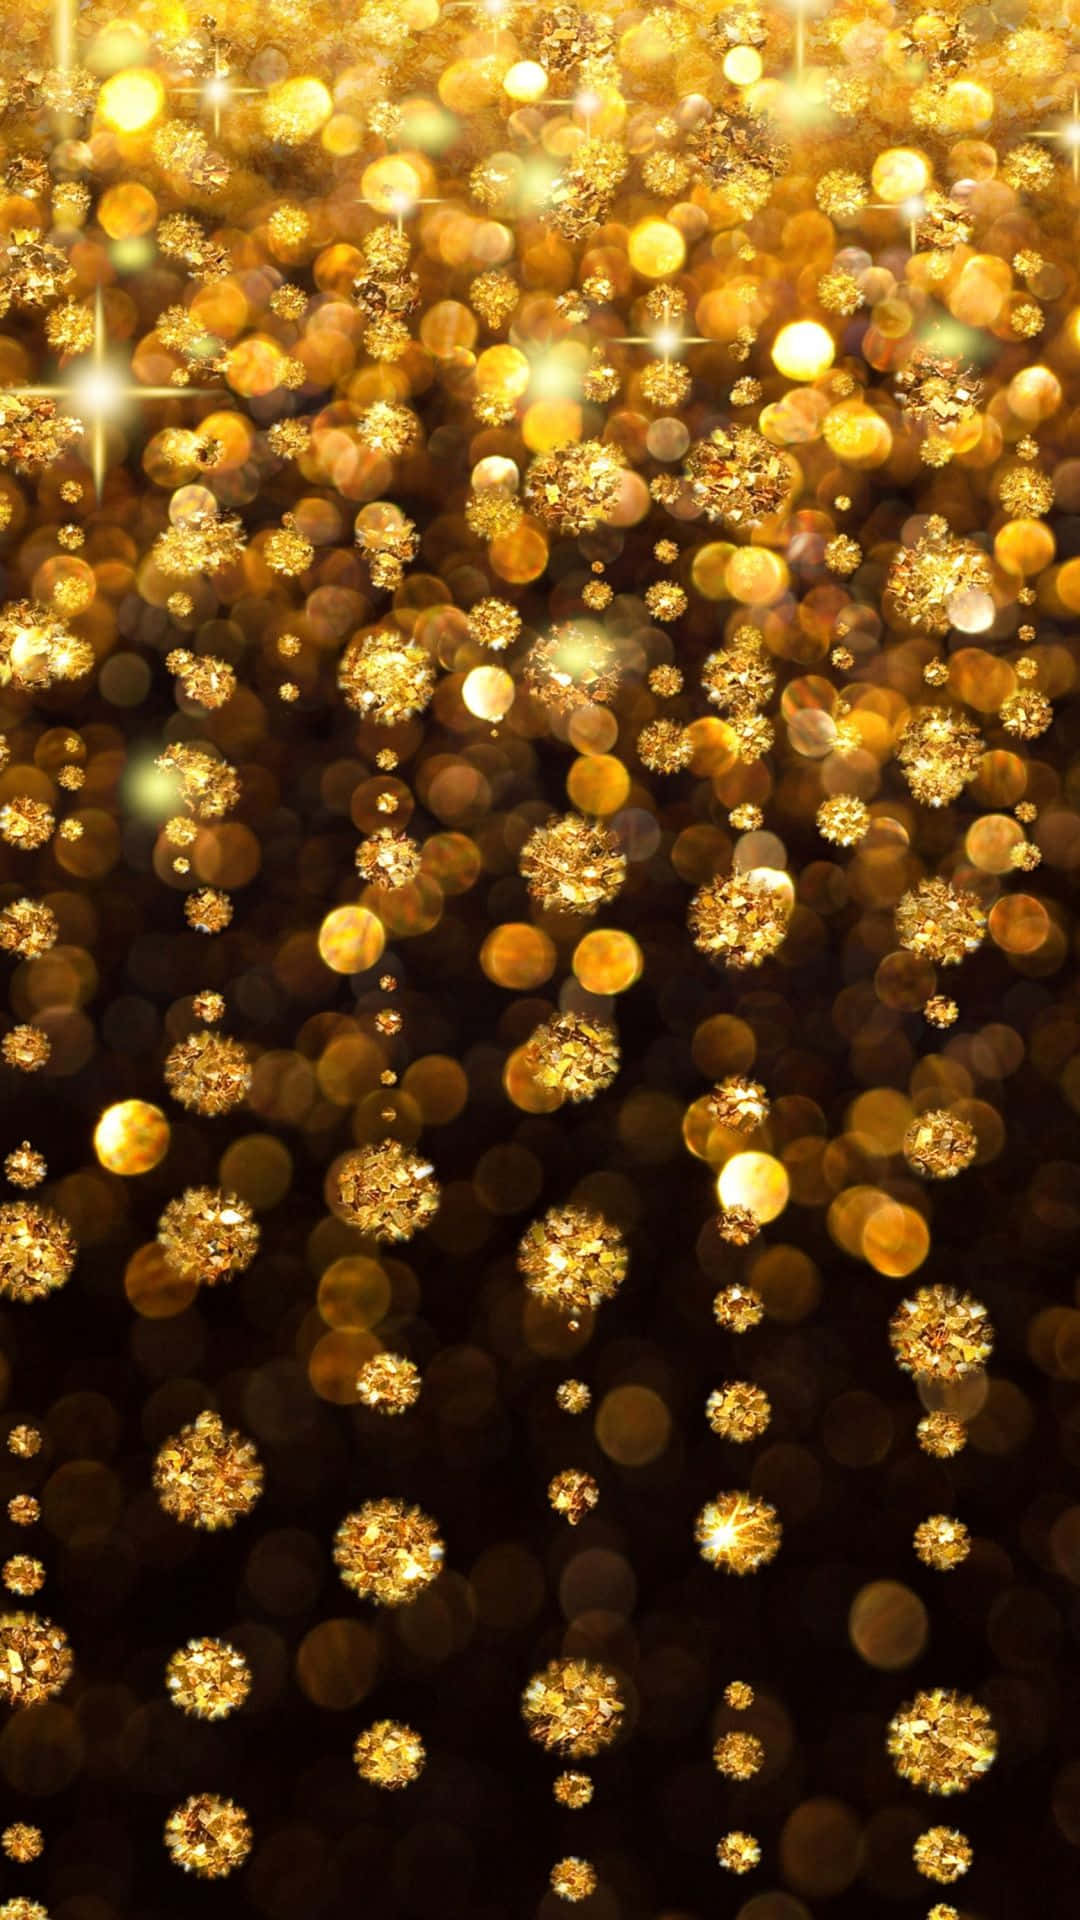 Start your holiday season with the iPhone -- make days brighter with new possibilities. Wallpaper